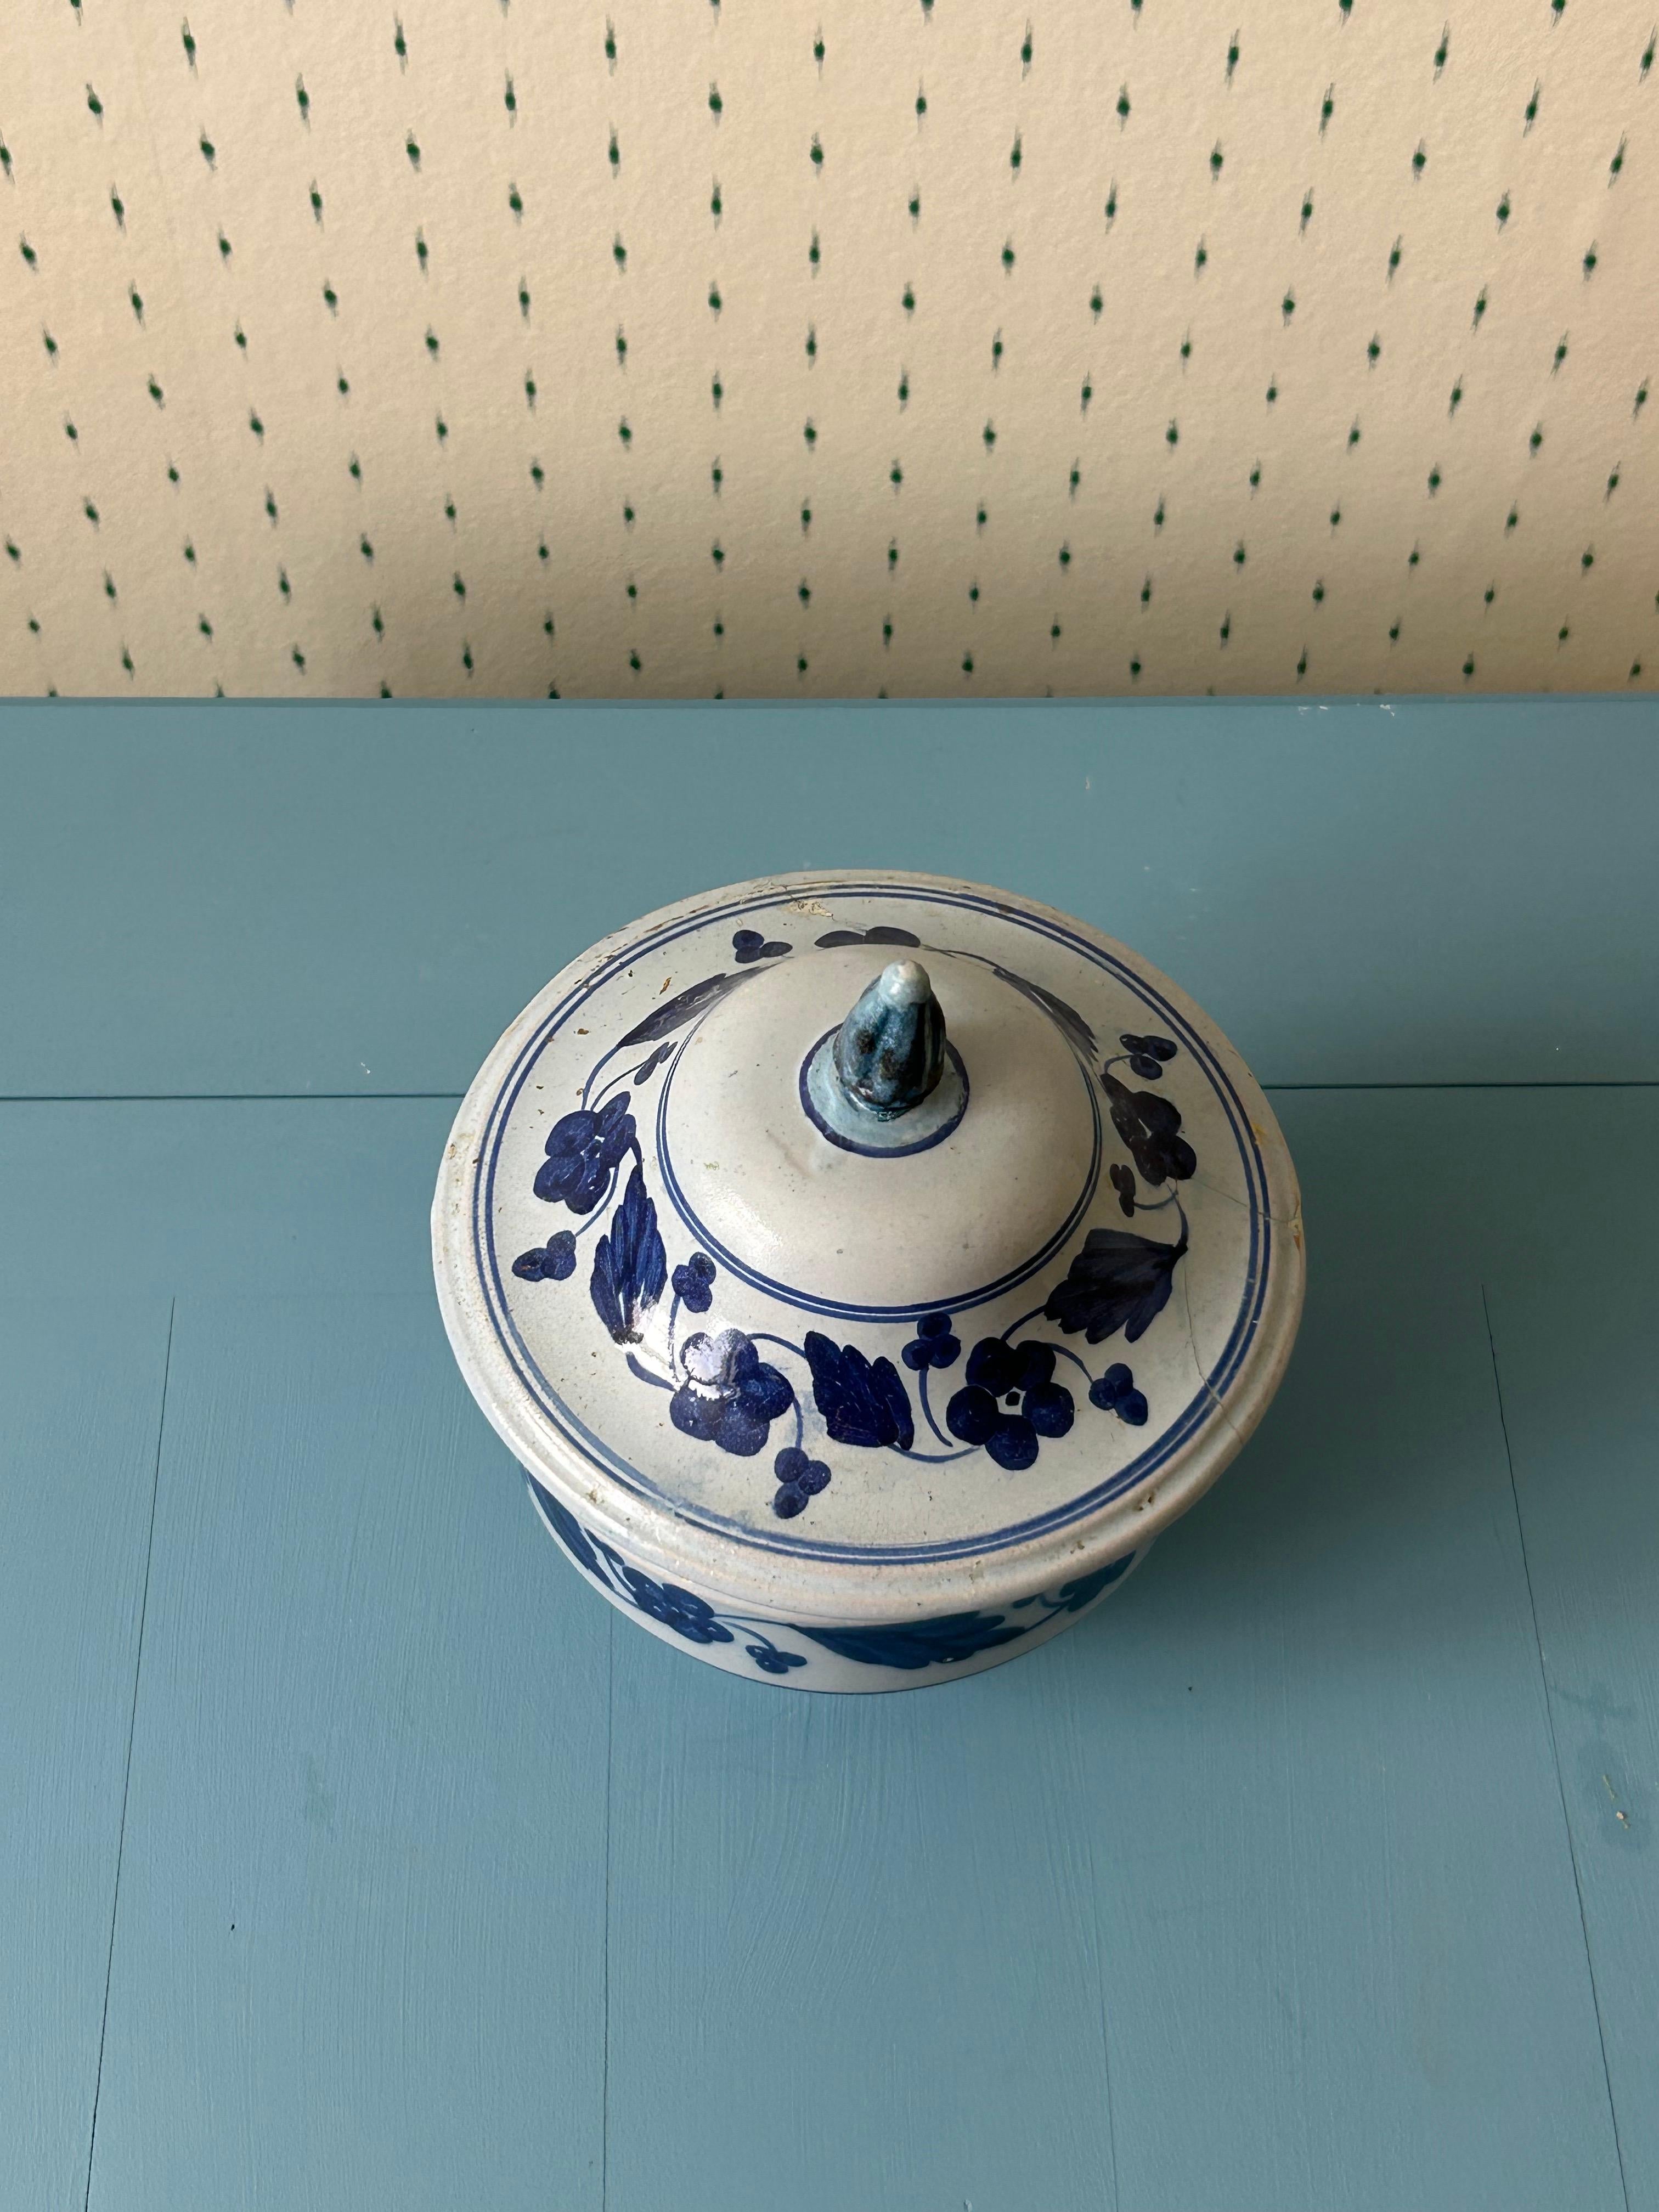 Vintage Ceramic Tureens with Blue Flower Decorations, Italy, Late 19th-Century For Sale 3